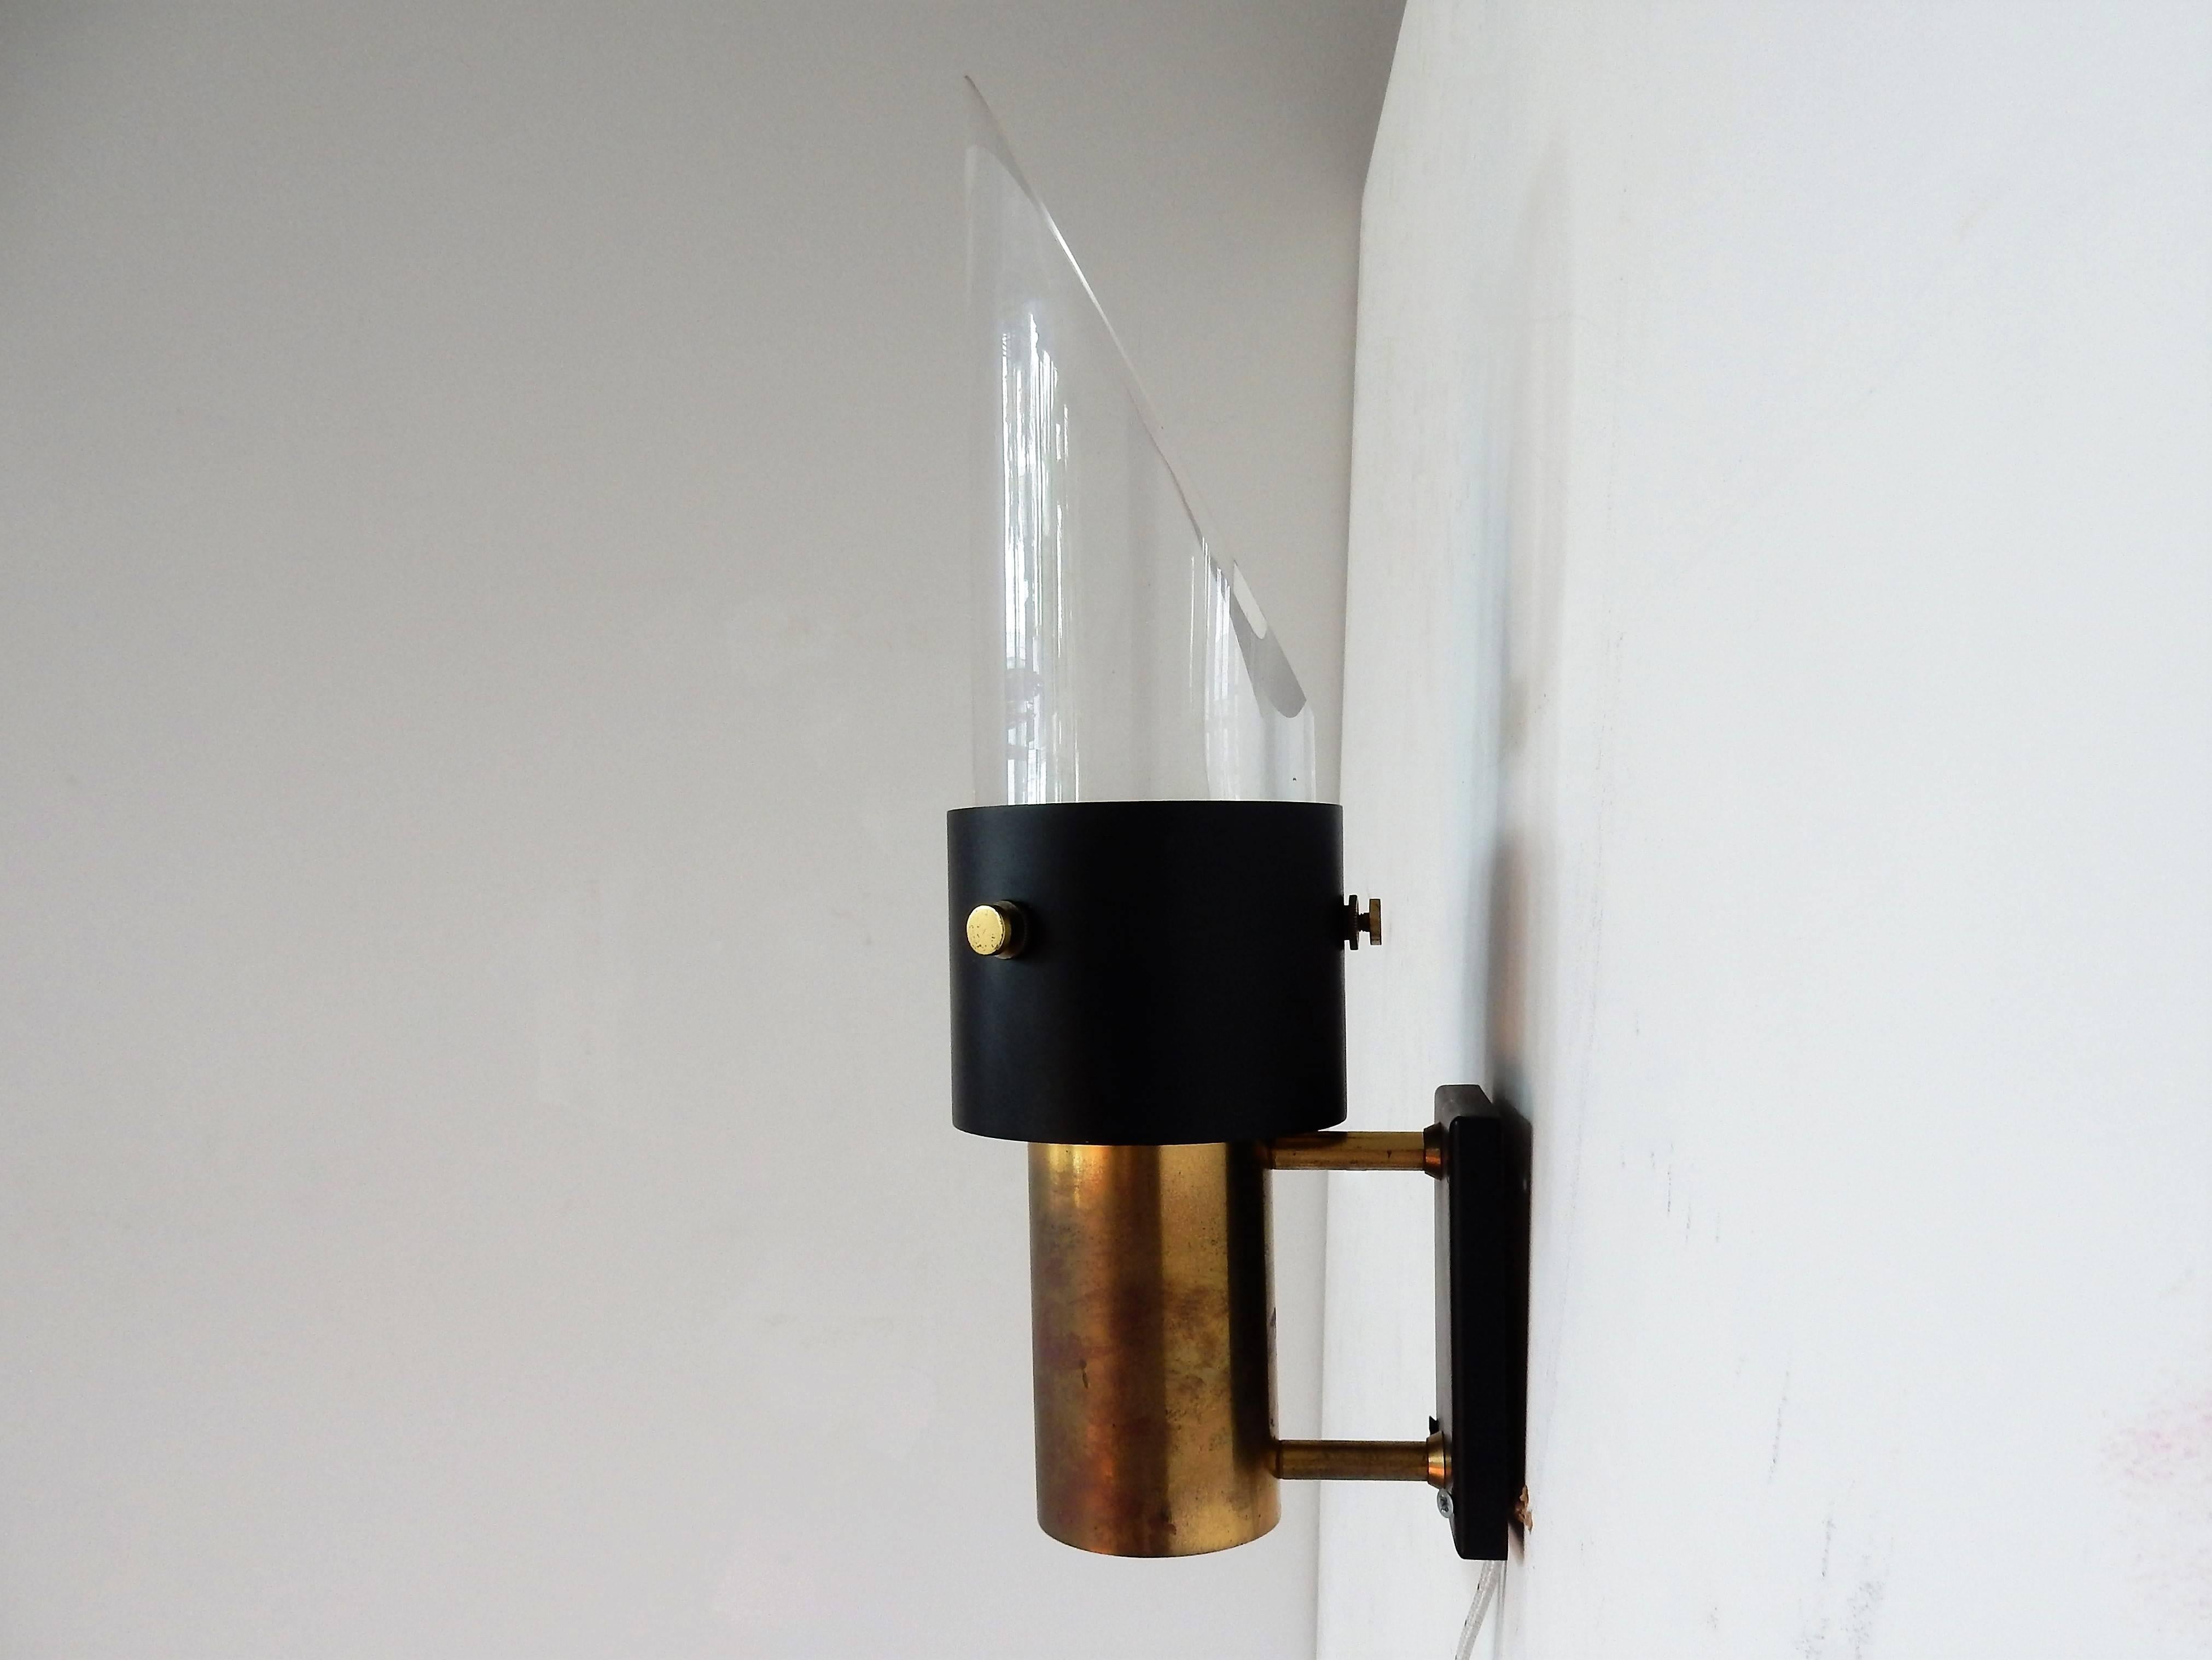 Late 17th Century Midcentury Crystal Glass and Brass 'Saga' Wall Sconce by Lyfa & Orrefors